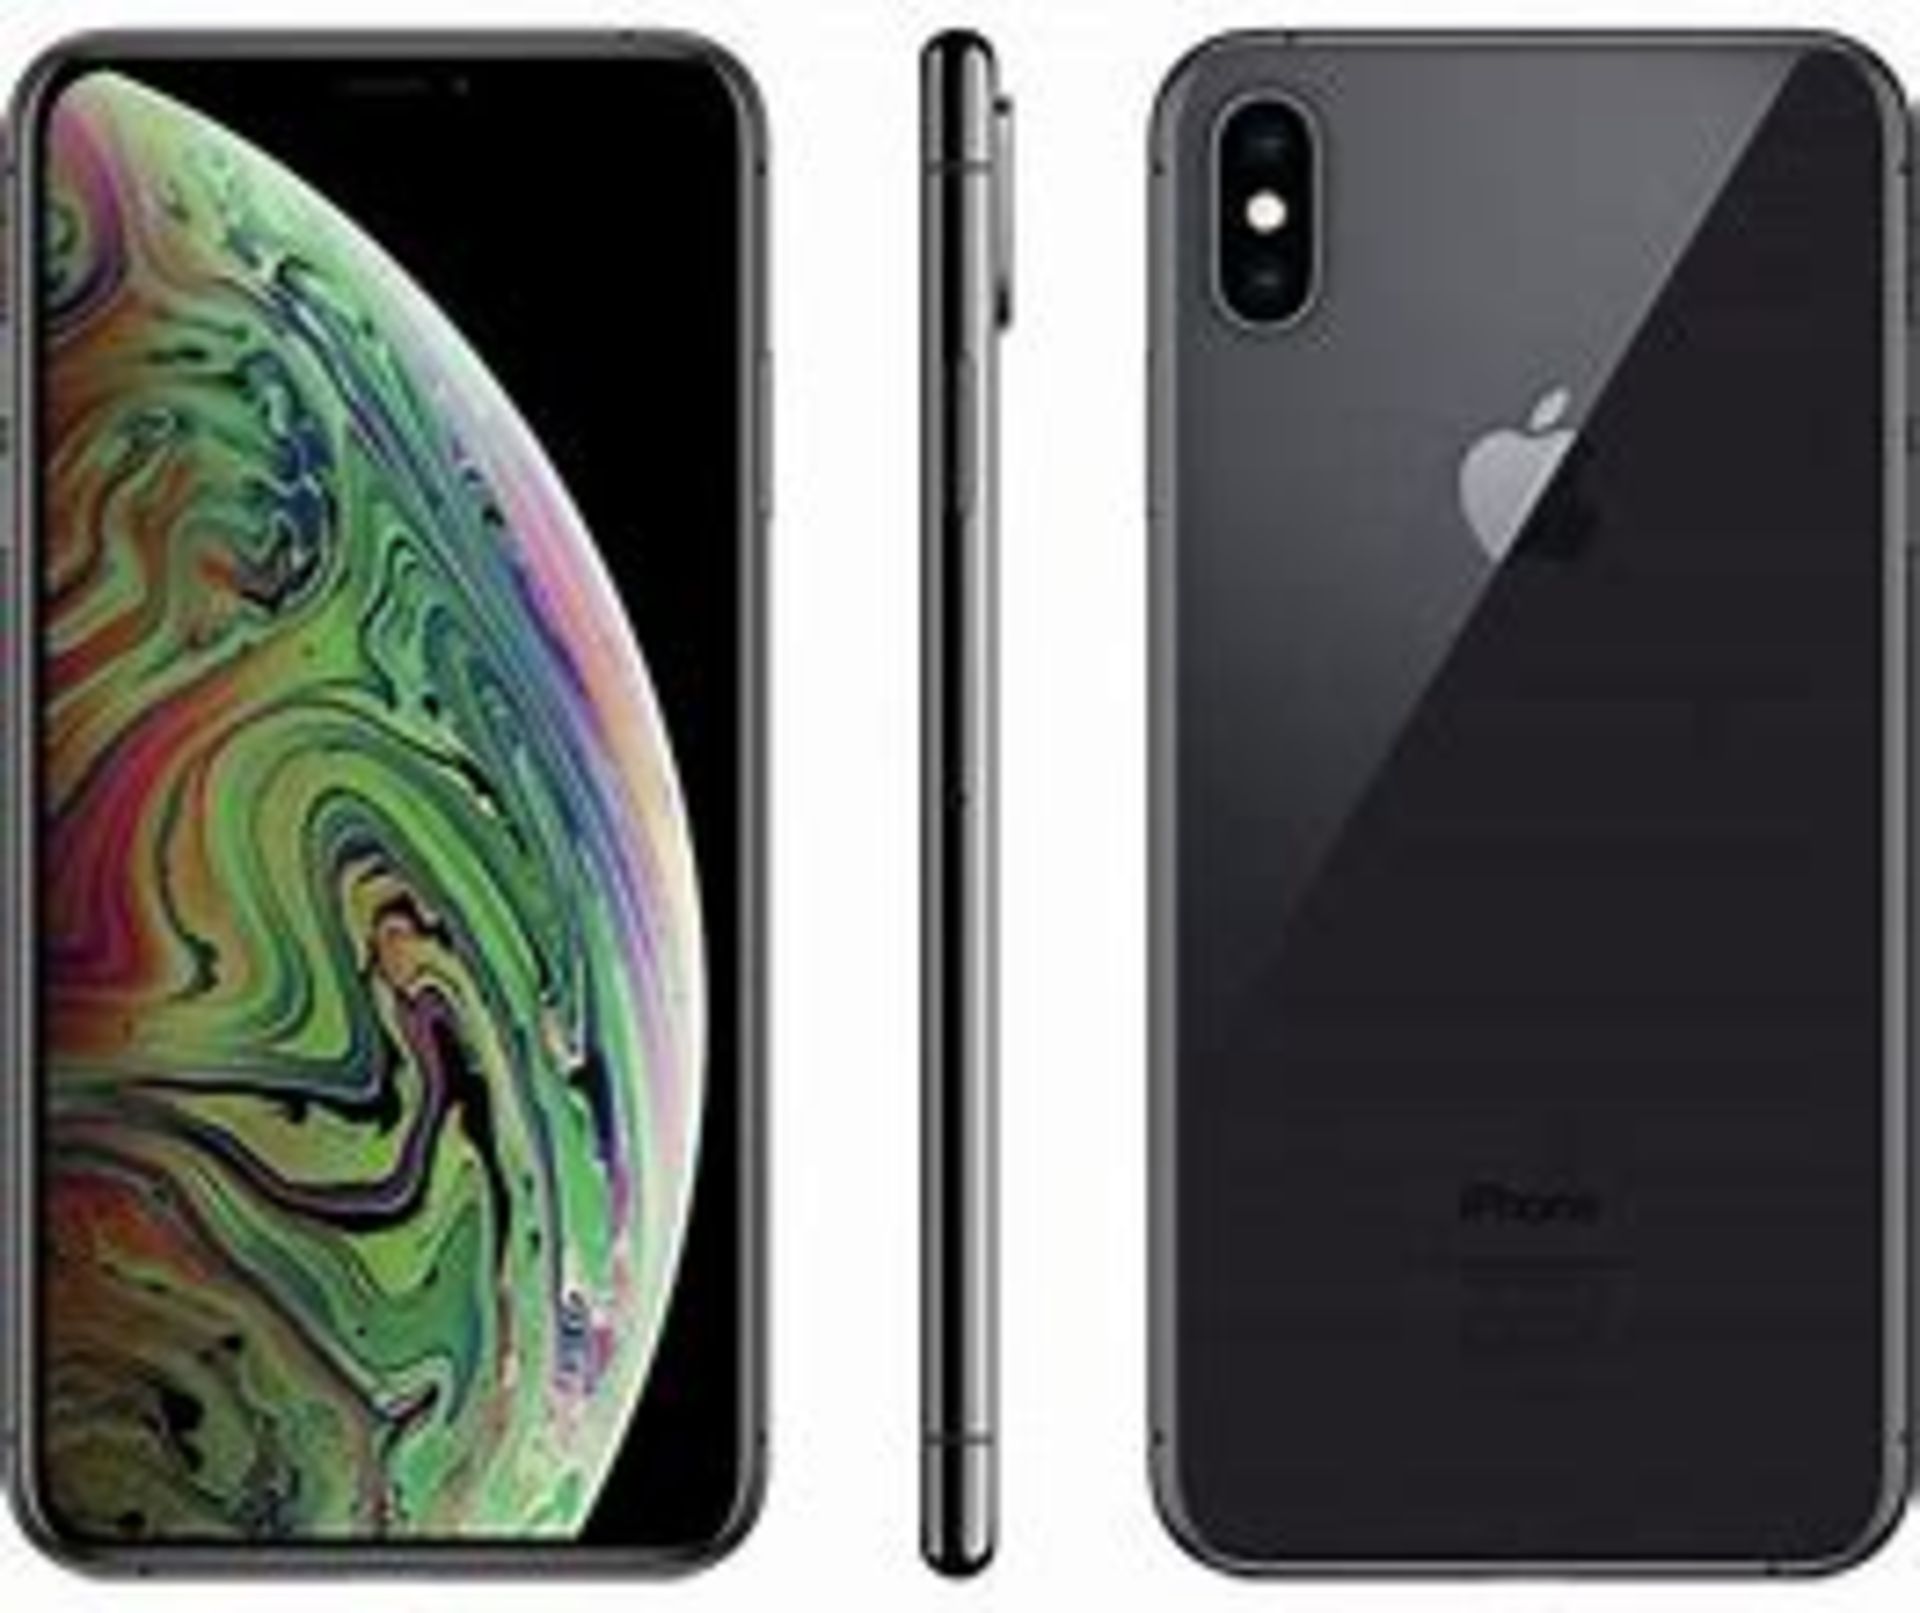 Apple iPhone Xs 64GB Space Grey RRP £920 - Grade A - Perfect Working Condition - (Fully